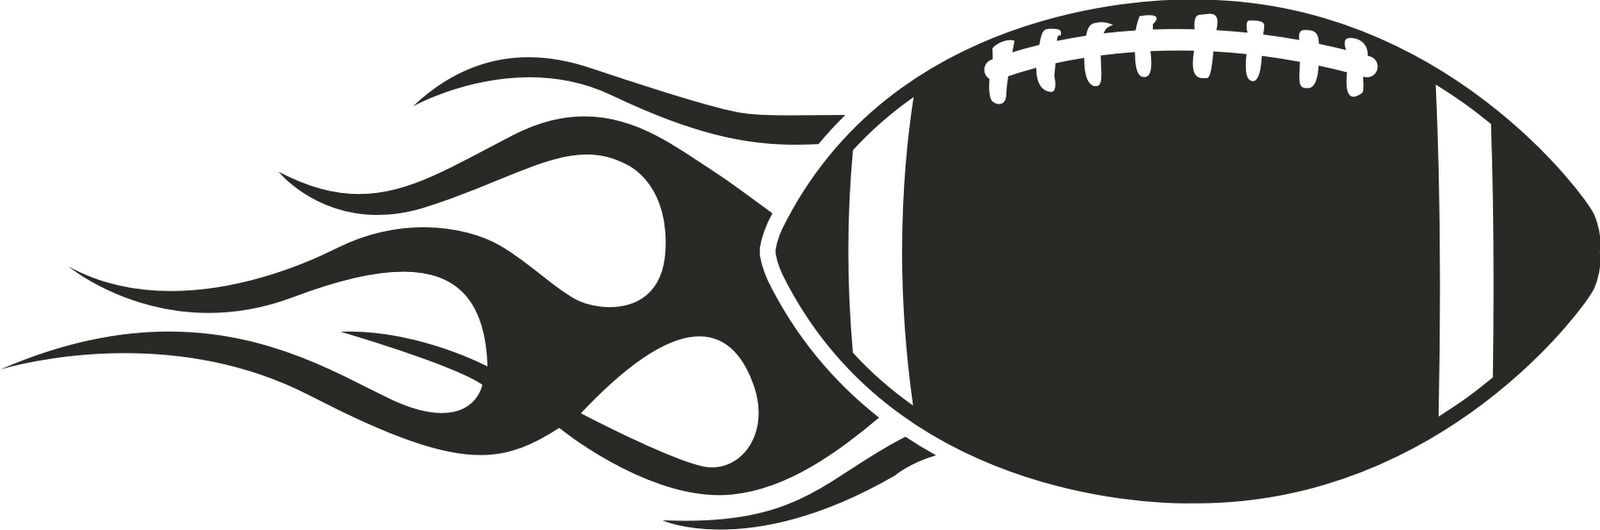 Football Clipart For T-shirts